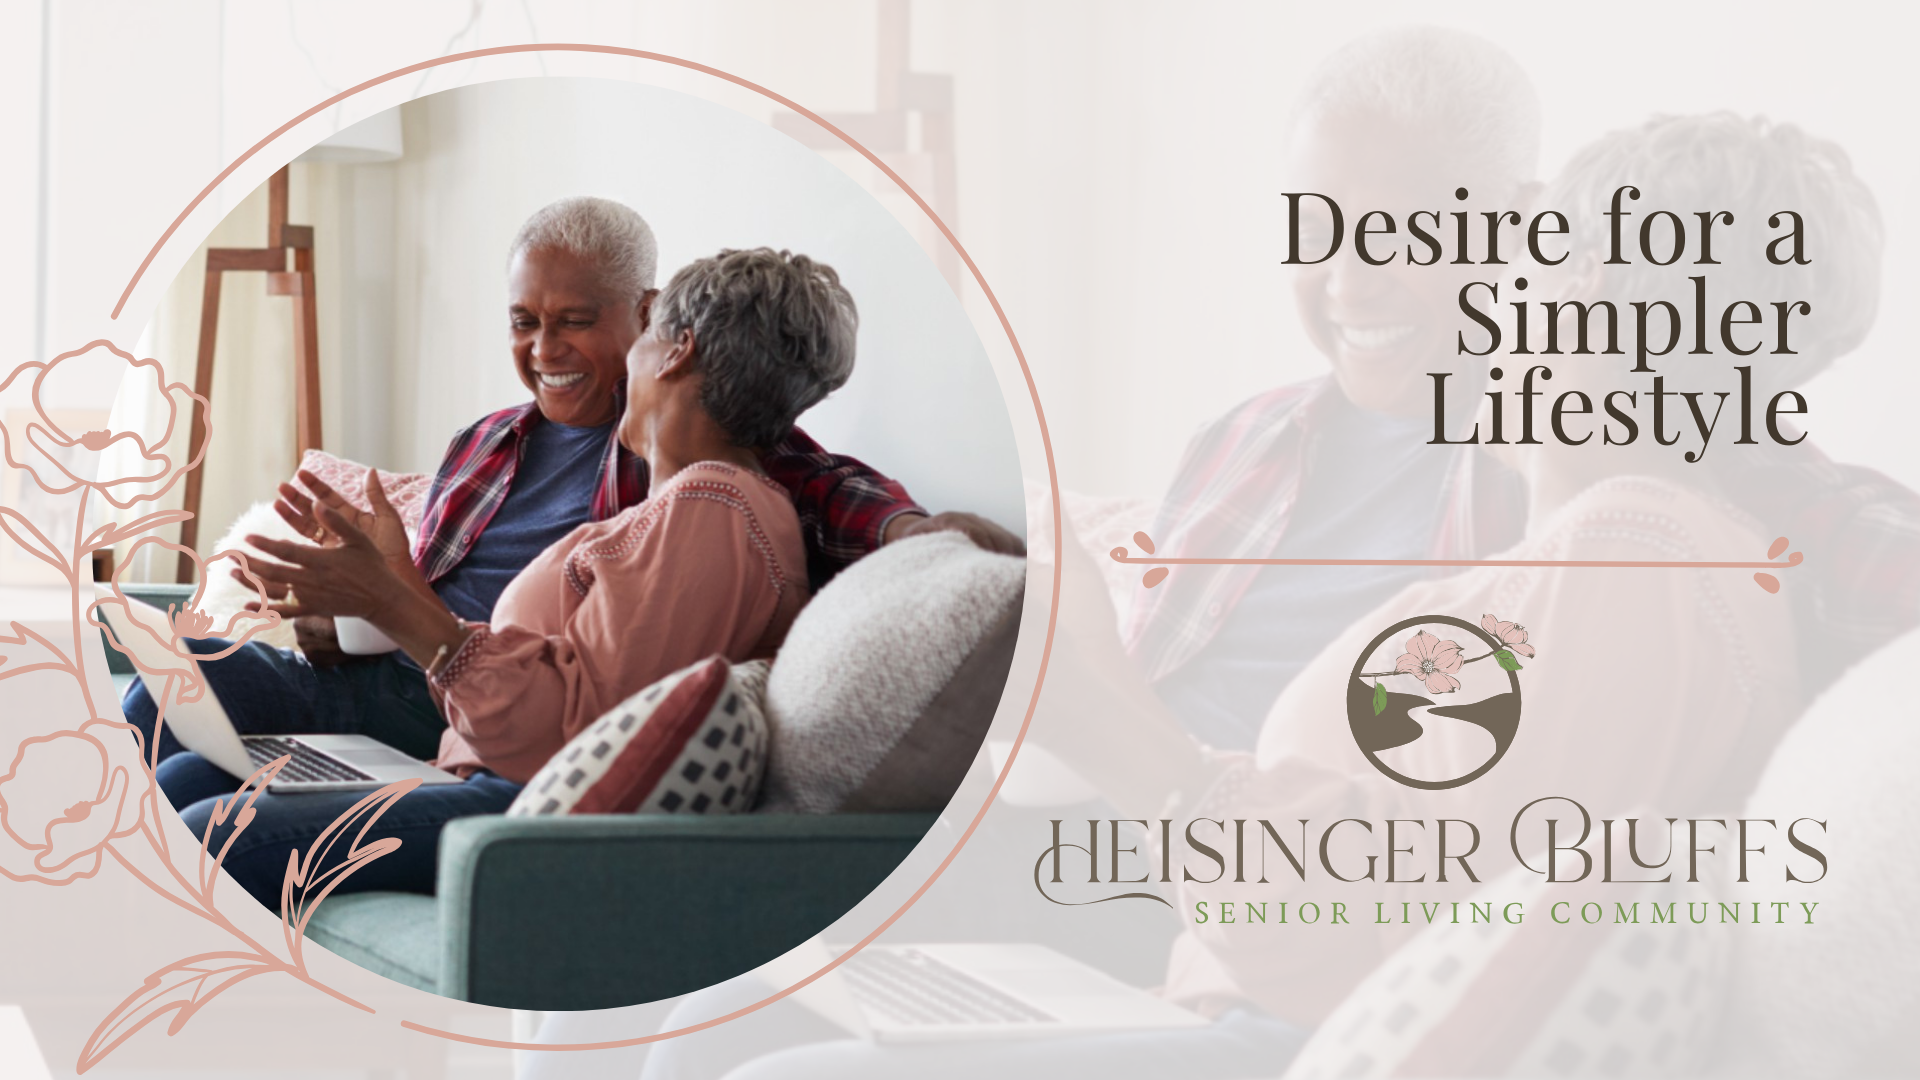 Independent Living offers a streamlined lifestyle